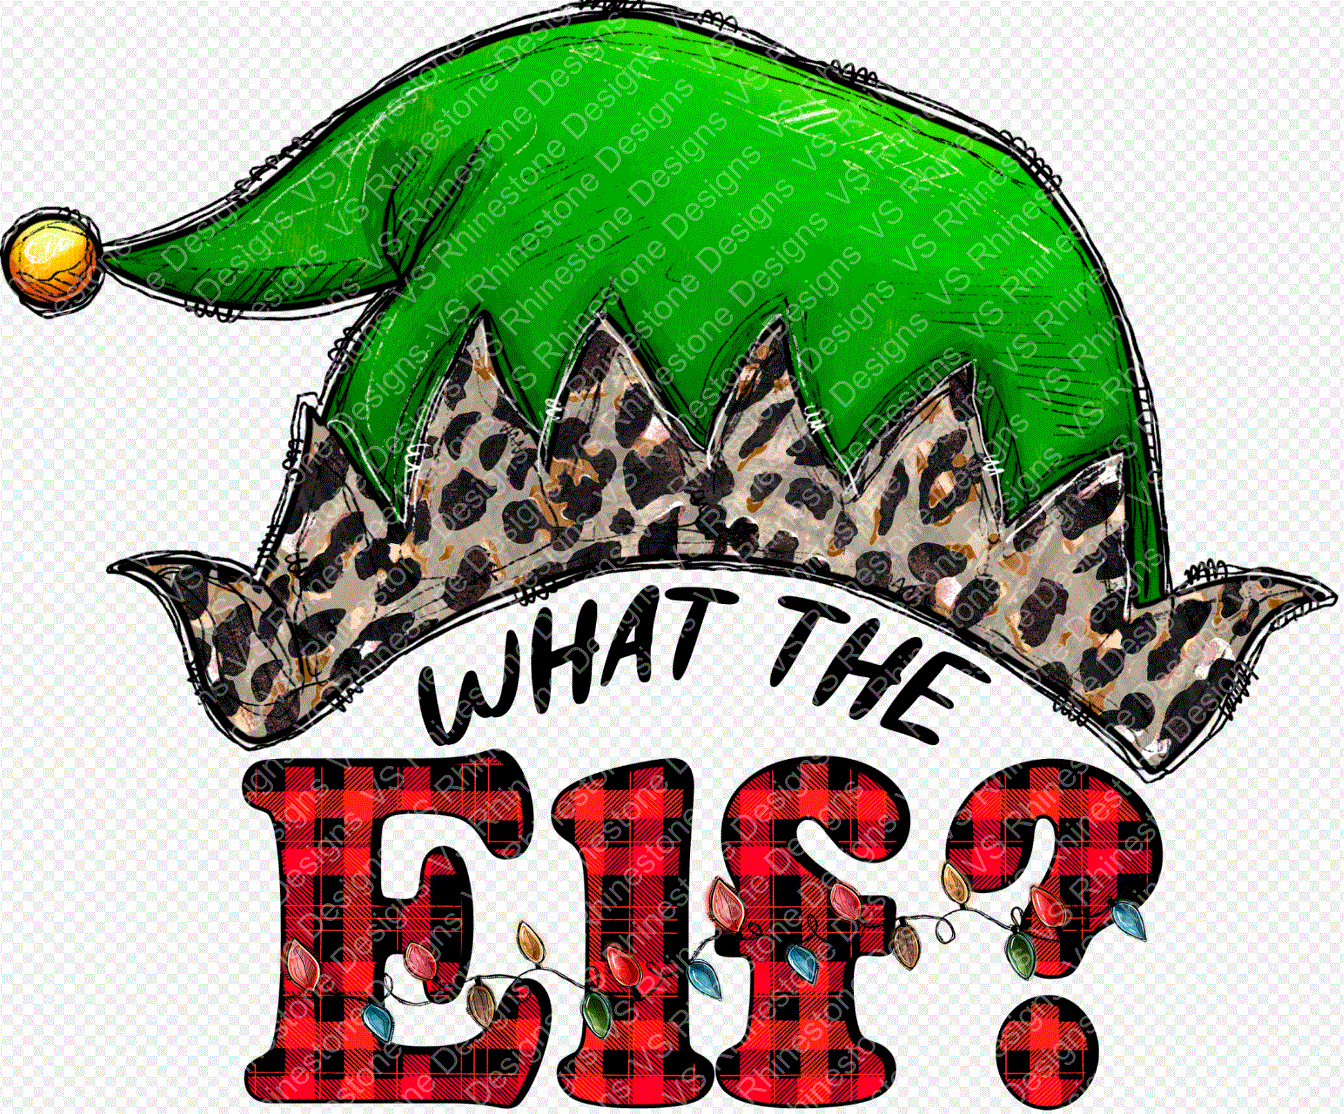 What the ELF SUBLIMATION PRINT